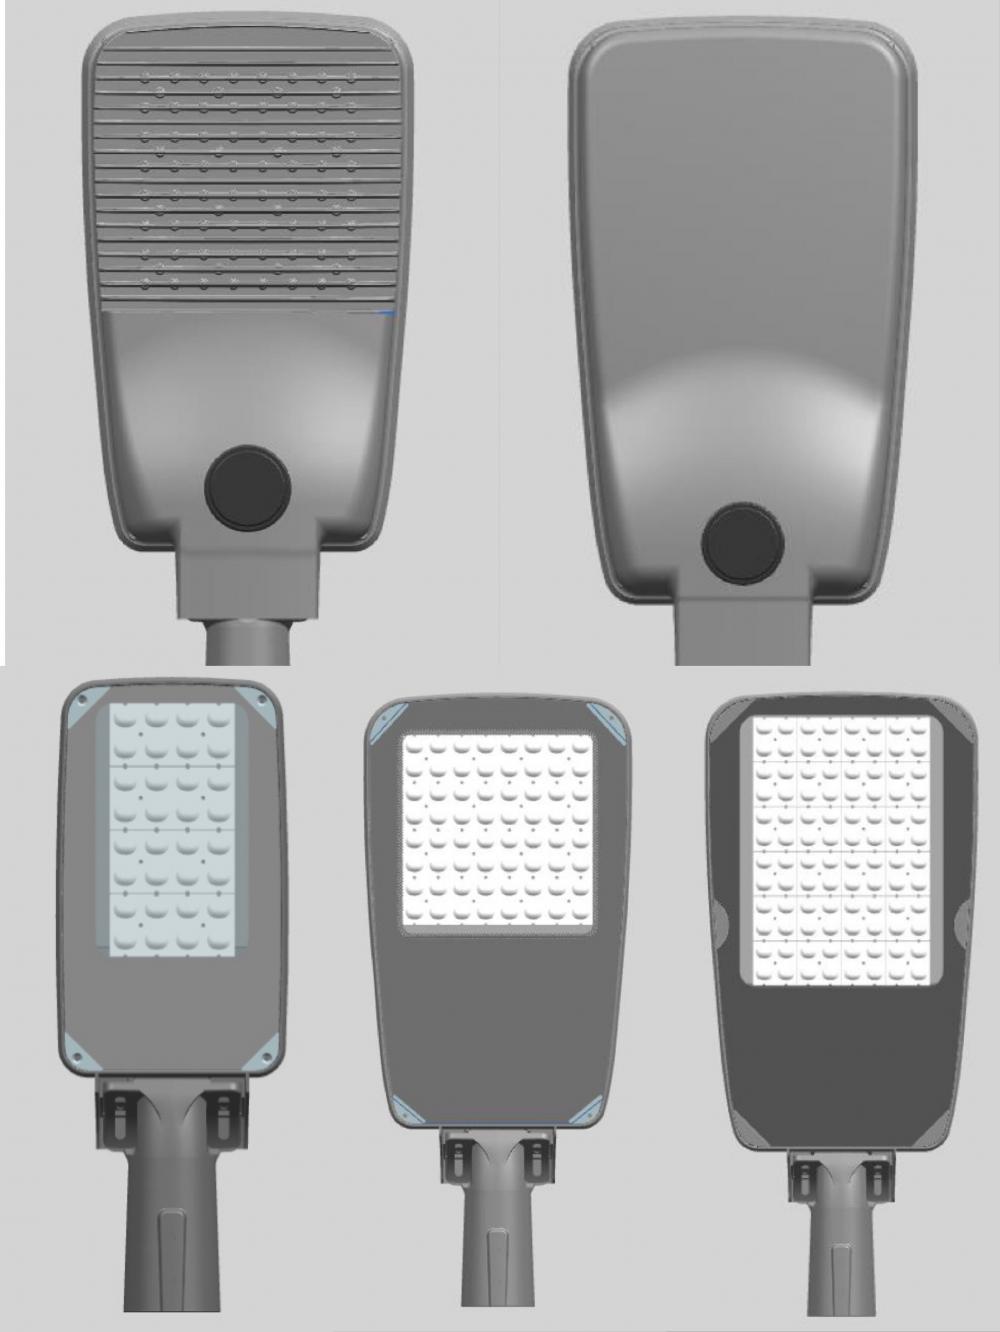 3 Size Of One Family With Two Kinds Of Backside Meaning That 6 Type Of New Street Light The Power Range From 30w To 250w All Available Jpg